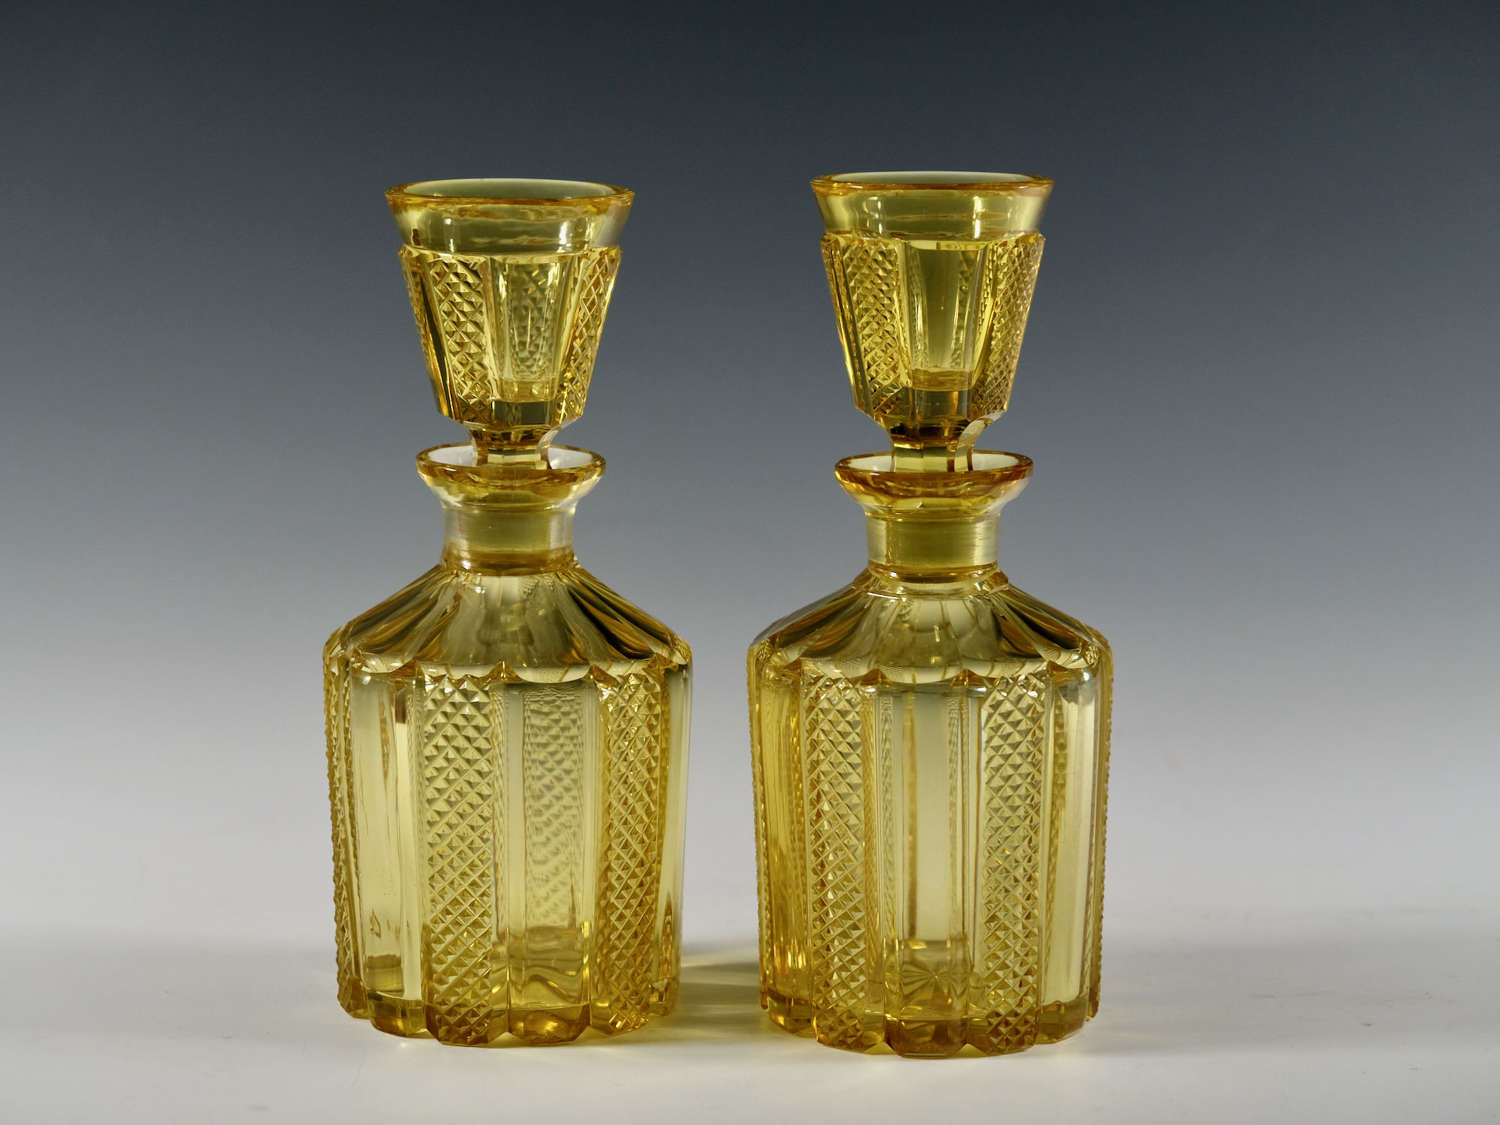 Antique glass - pair of decanters with tasting stoppers c1830